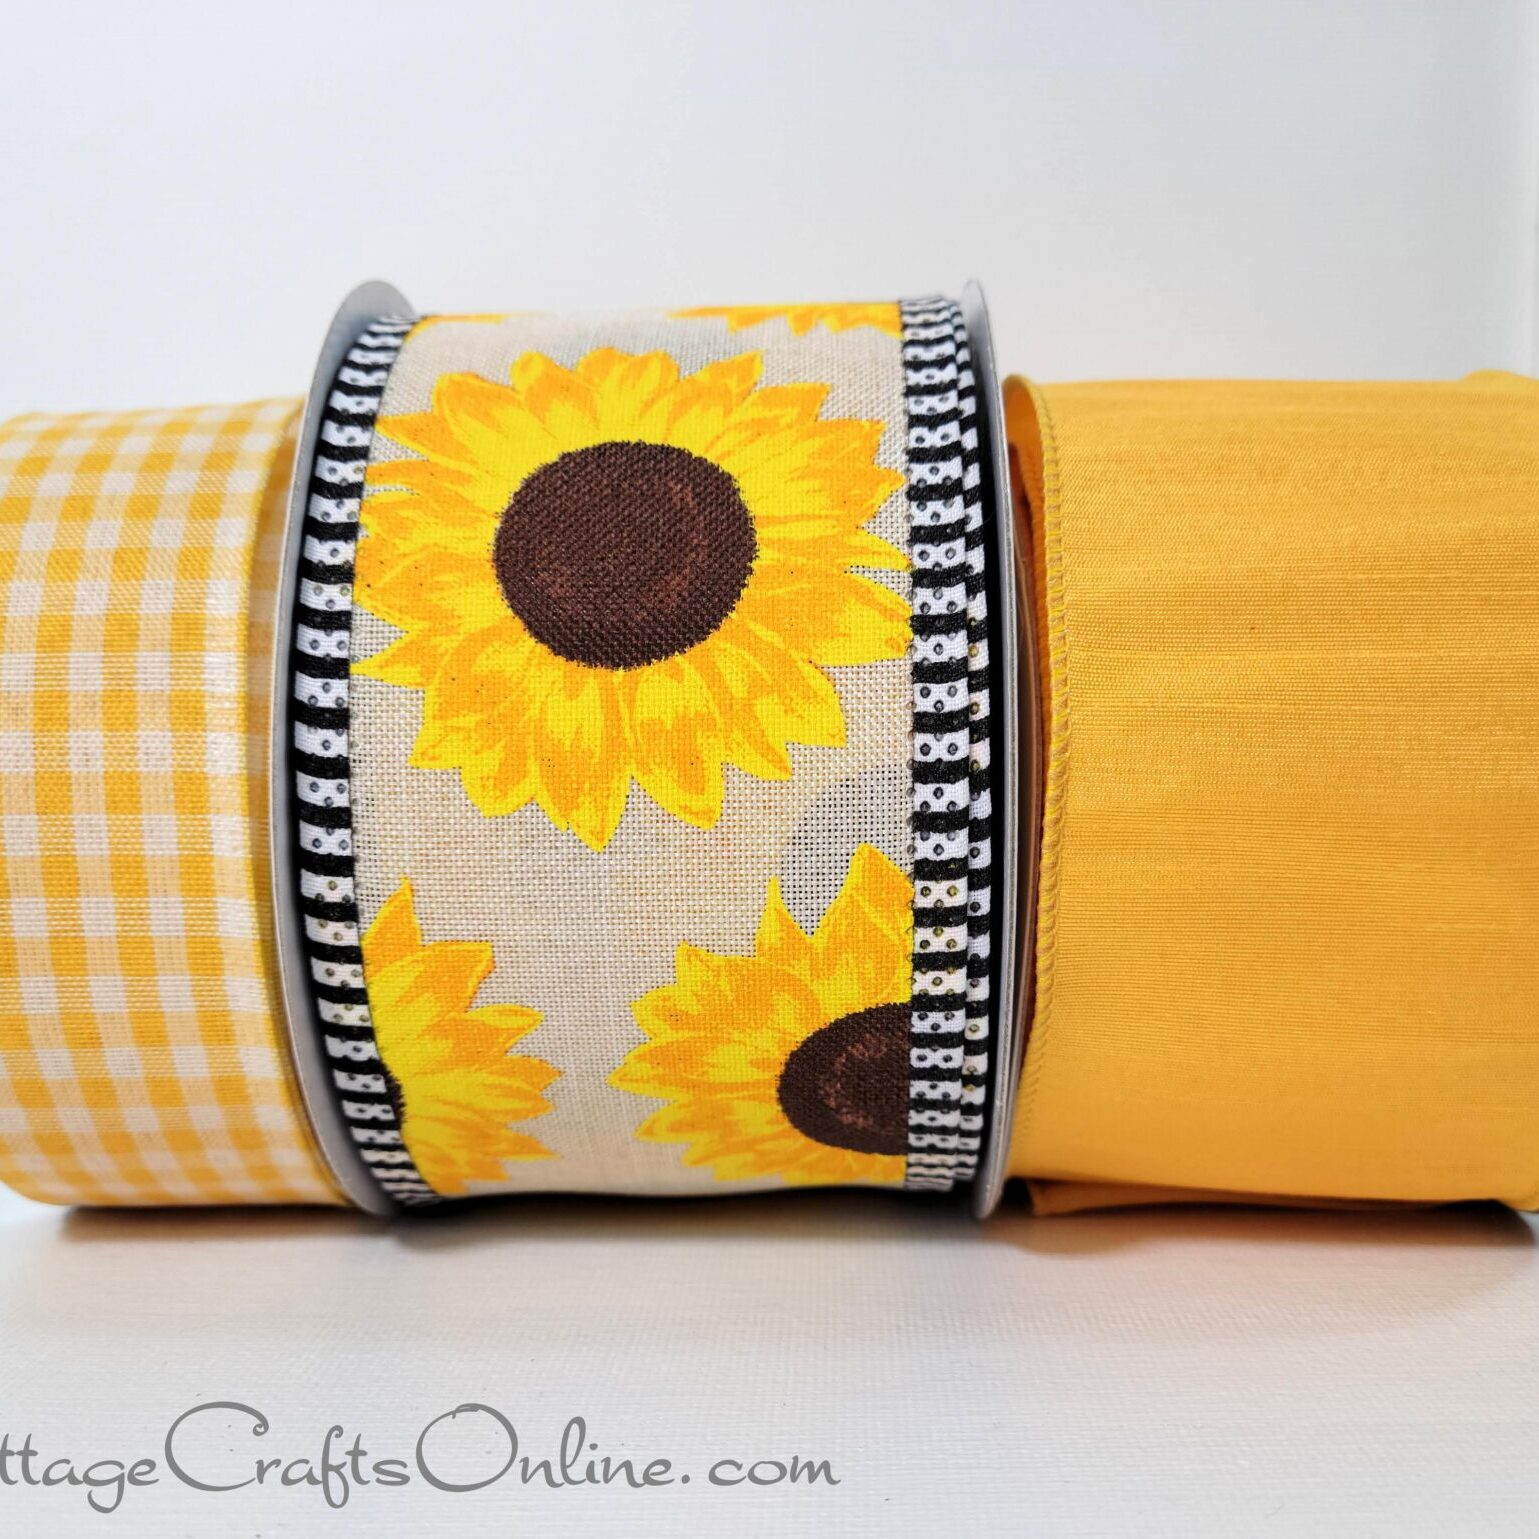 A yellow towel with sunflowers on it